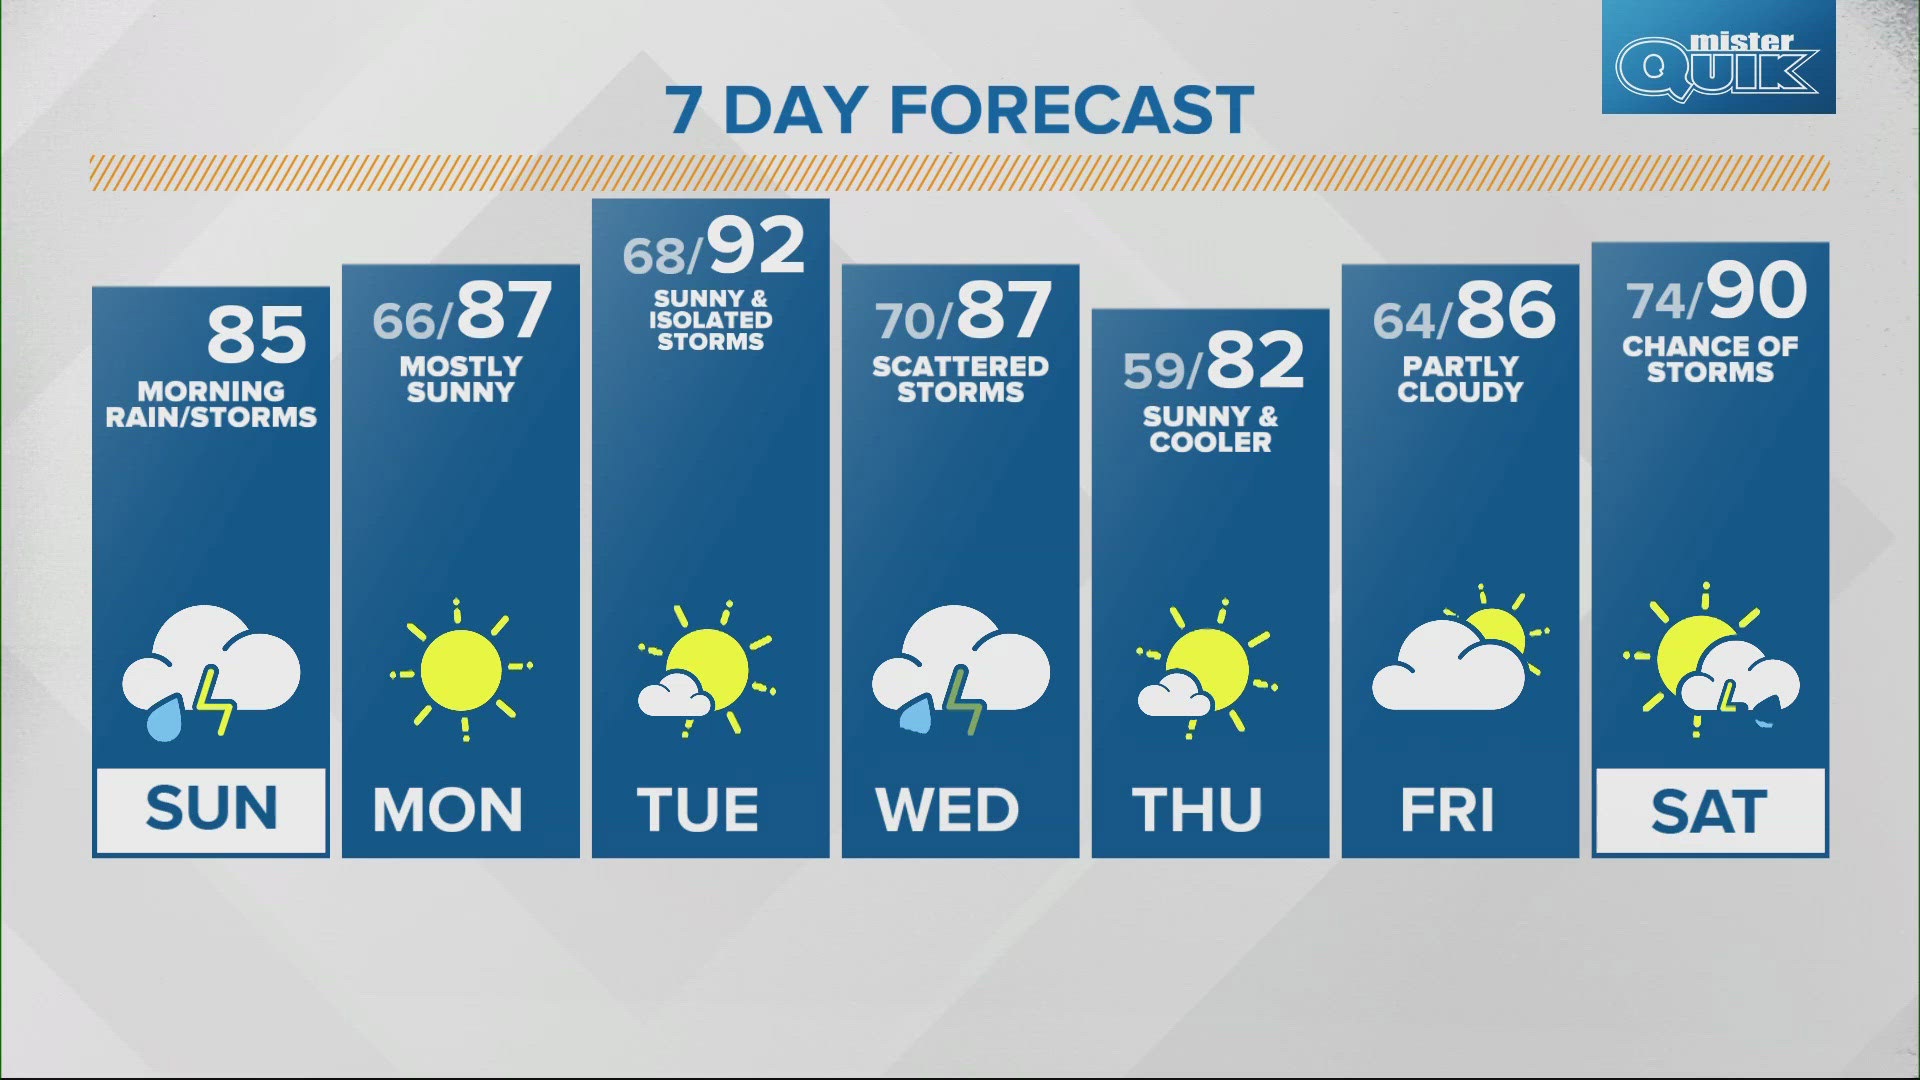 Temperatures peak into the 90s with a few chances for showers this week.